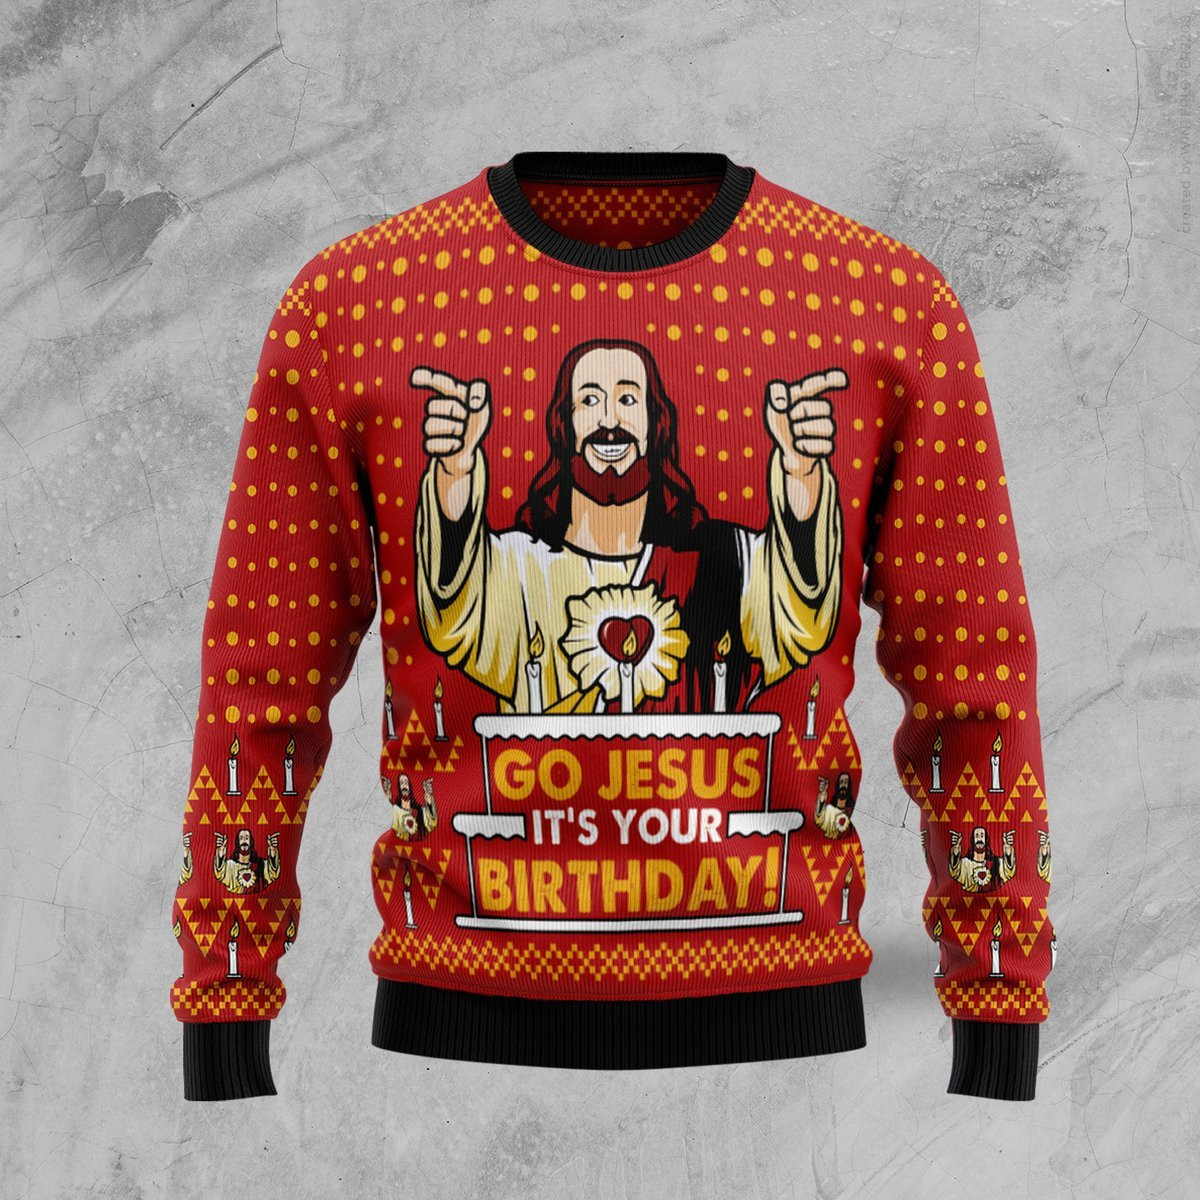 Jessuss Birthday Ugly Christmas Sweater Ugly Sweater For Men Women